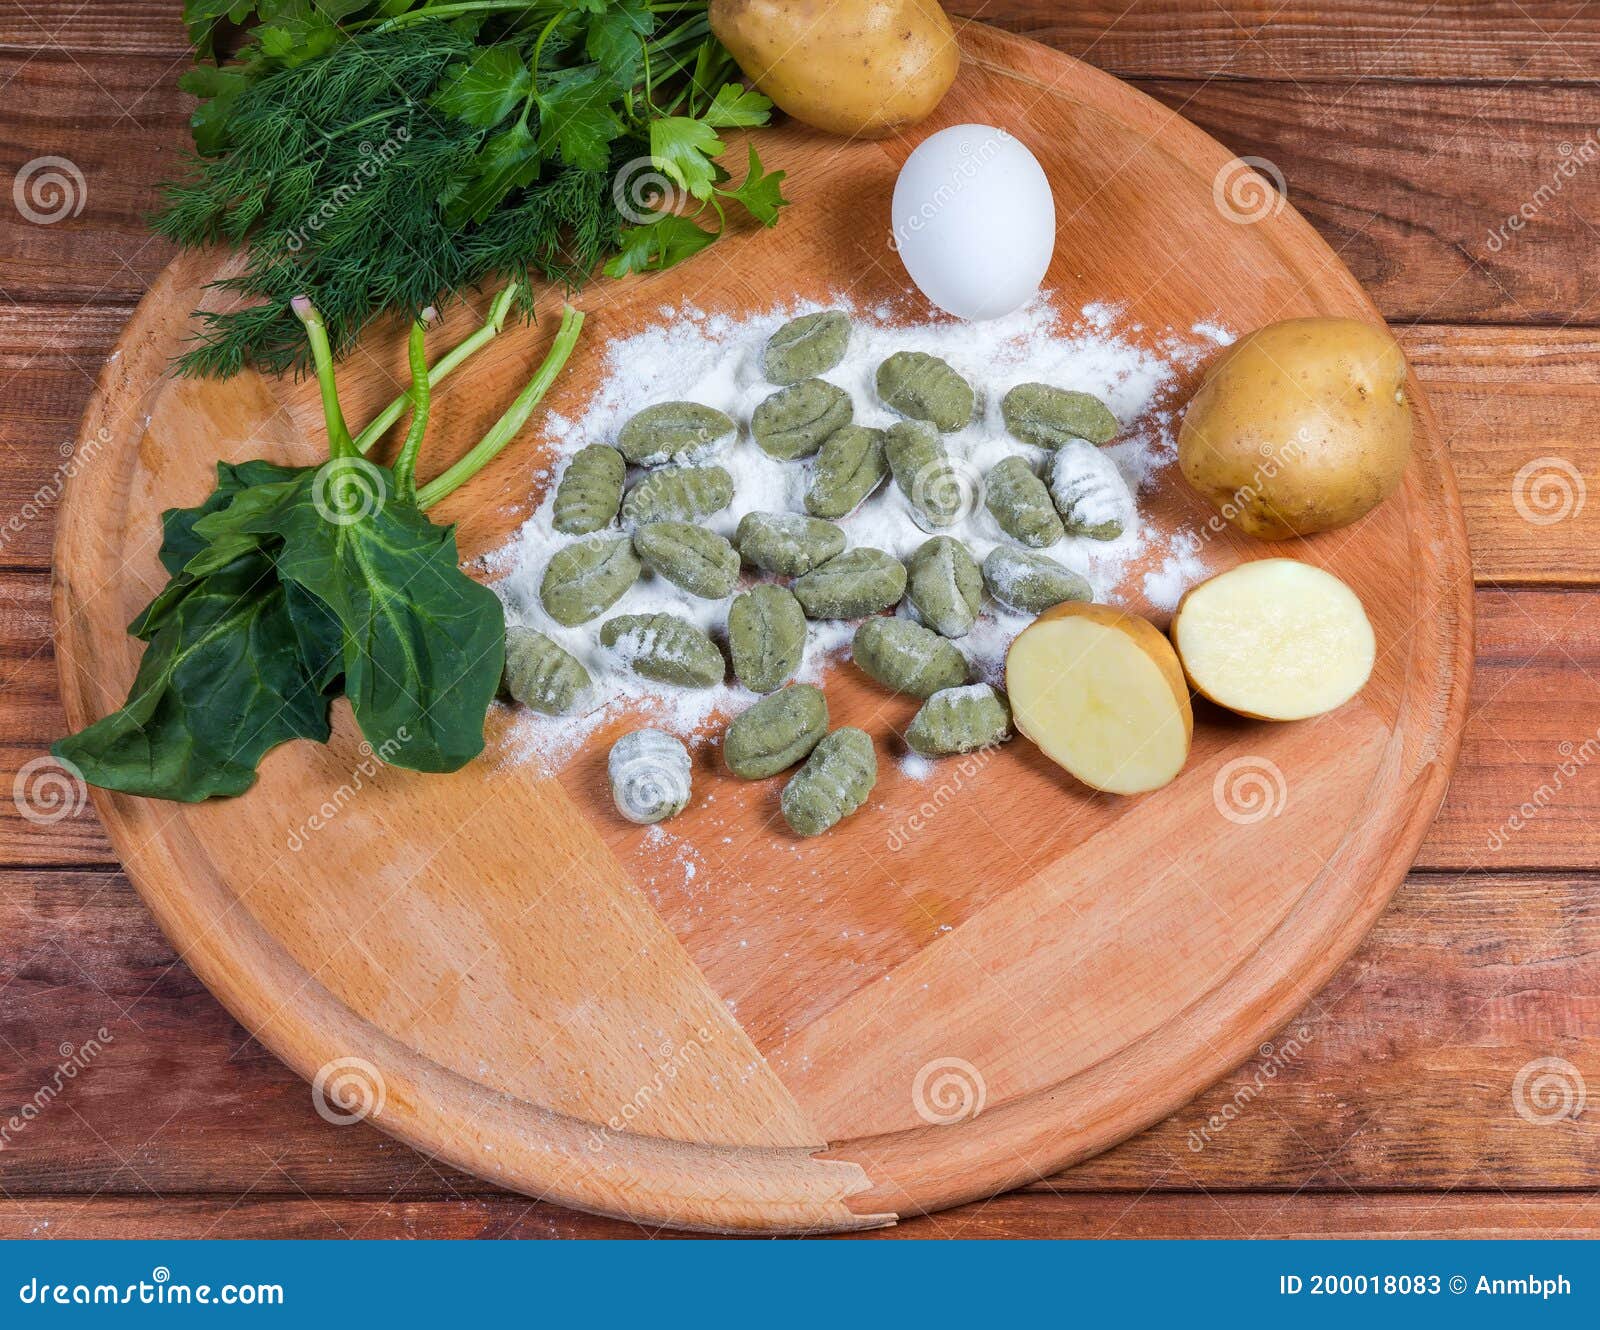 uncooked potato gnocchi with spinach, ingredients on round wooden board